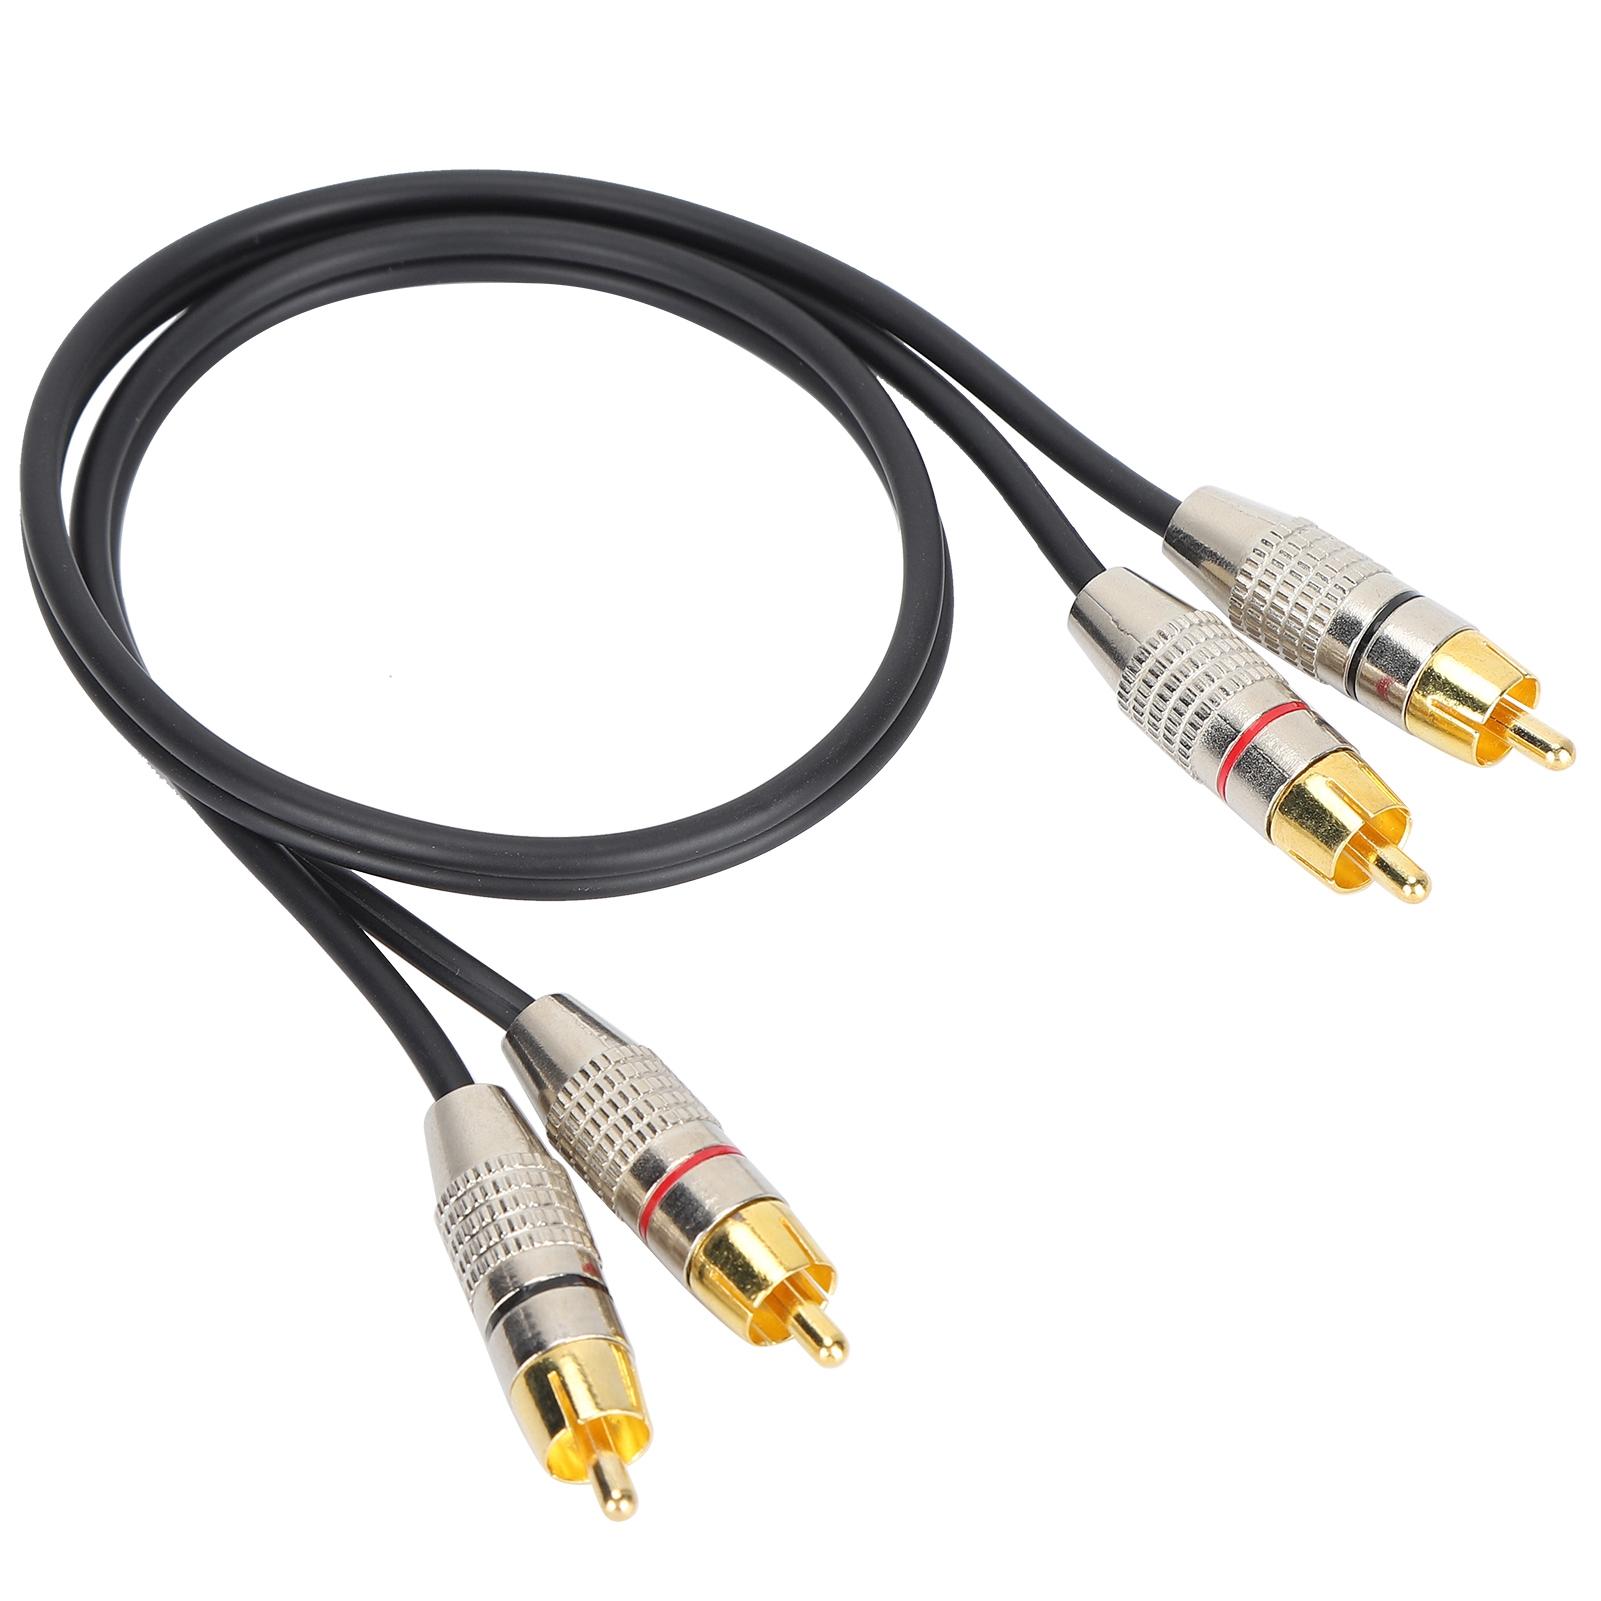 XiaoDian2SL Audio Cable 2RCA Male to 2RCA Male Audio Cable with Aluminum Alloy Connector for Xbox 360